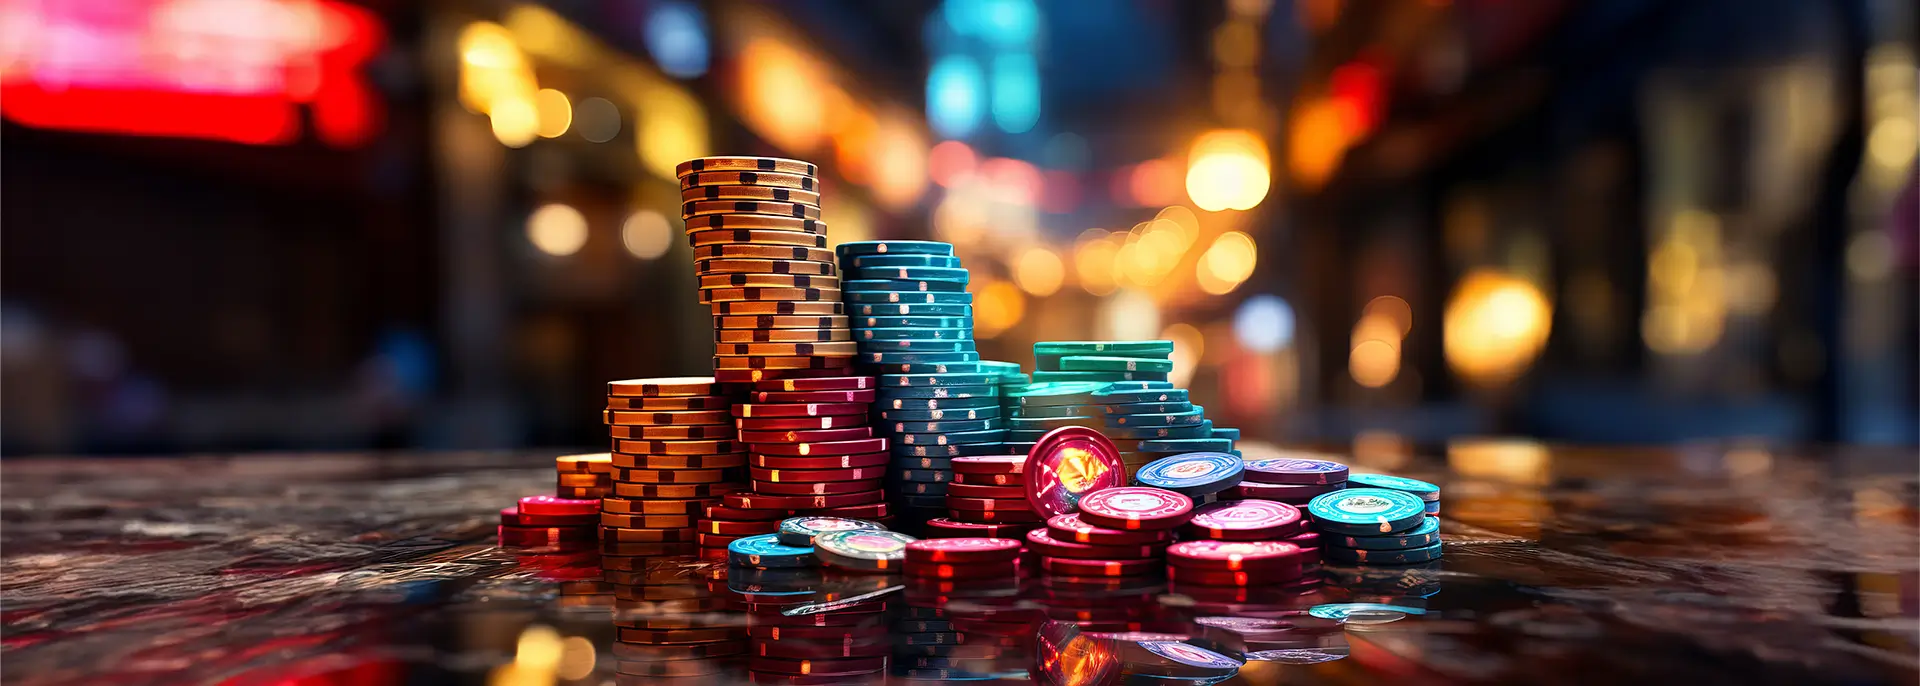 Close up and shallow-depth focus of colorful poker chips stacked high with glowing light bokeh floating around them